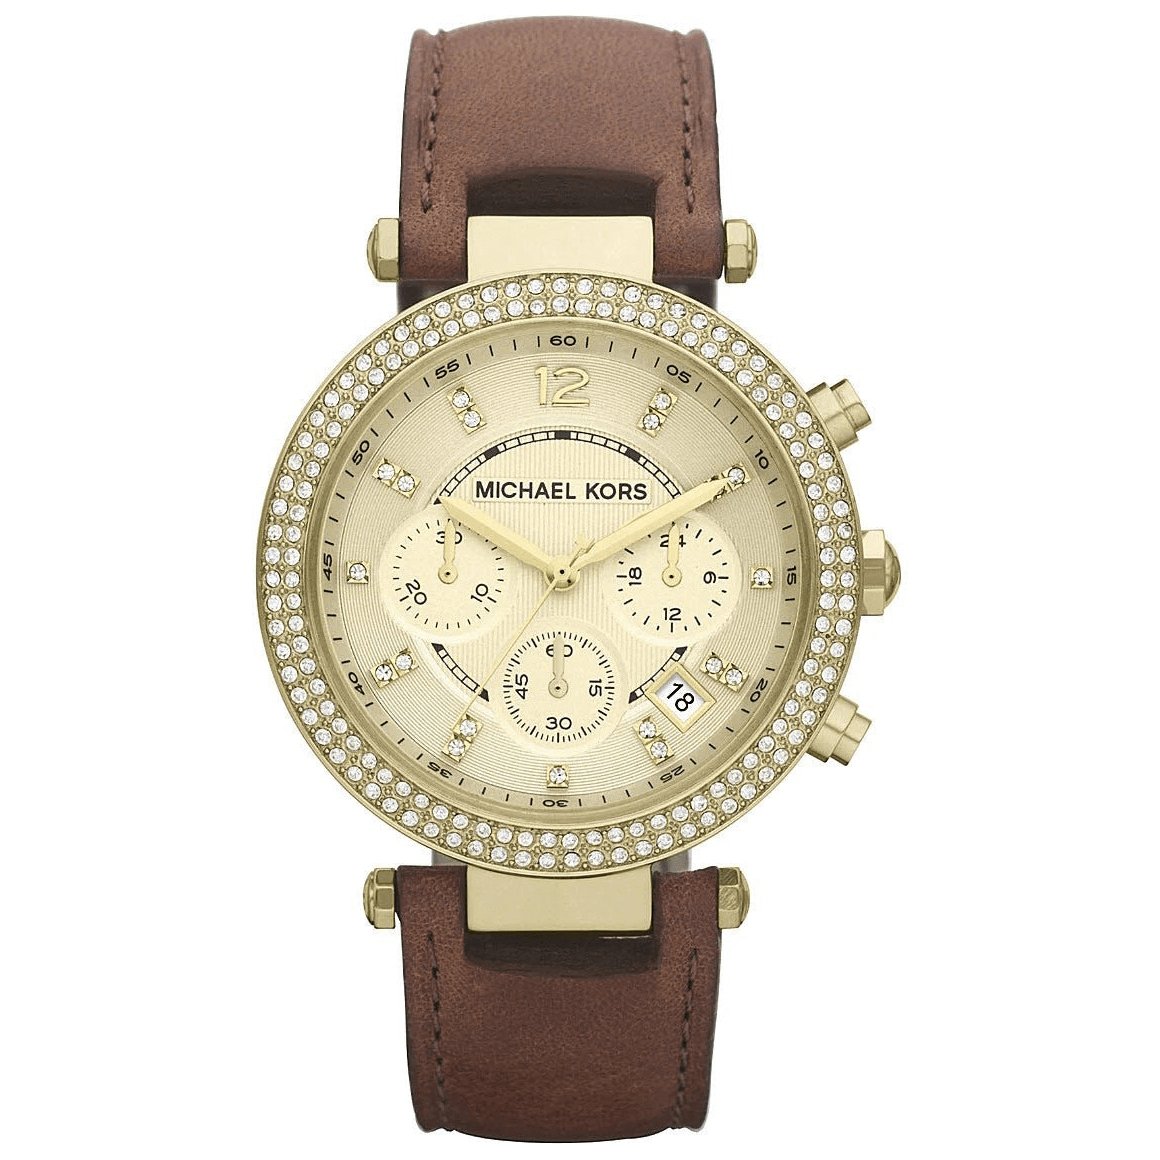 Michael Kors Ladies Watch Parker Brown Leather MK2249 - Watches & Crystals